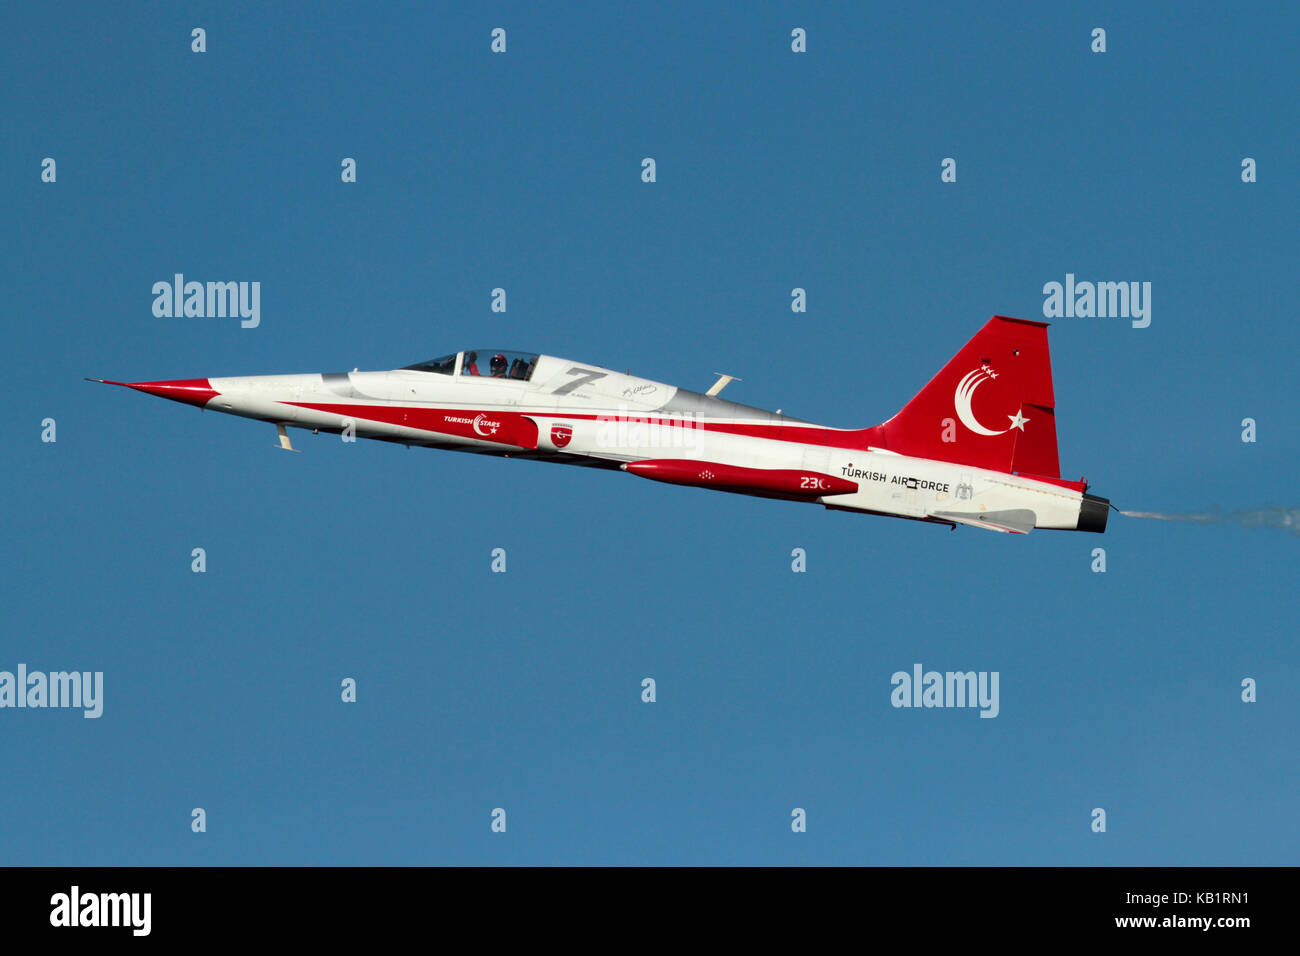 NF-5 pilot of the Turkish Stars military display team waving to spectators while flying a solo slow pass at an airshow Stock Photo